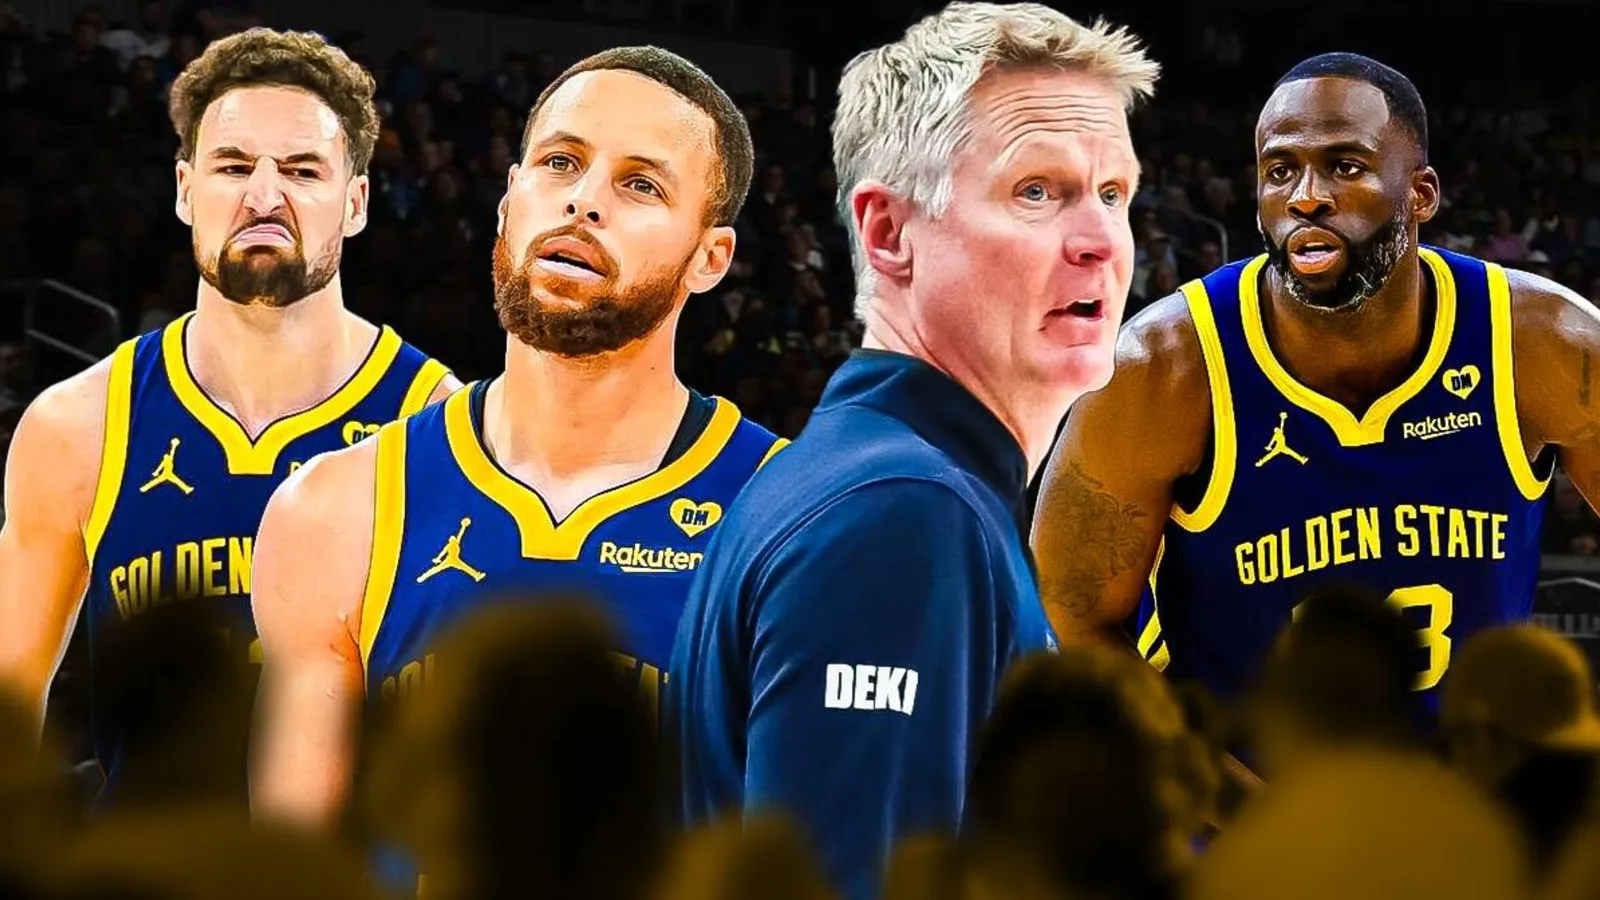 Steve Kerr gives confident message ahead of Warriors vs. Kings Play-In